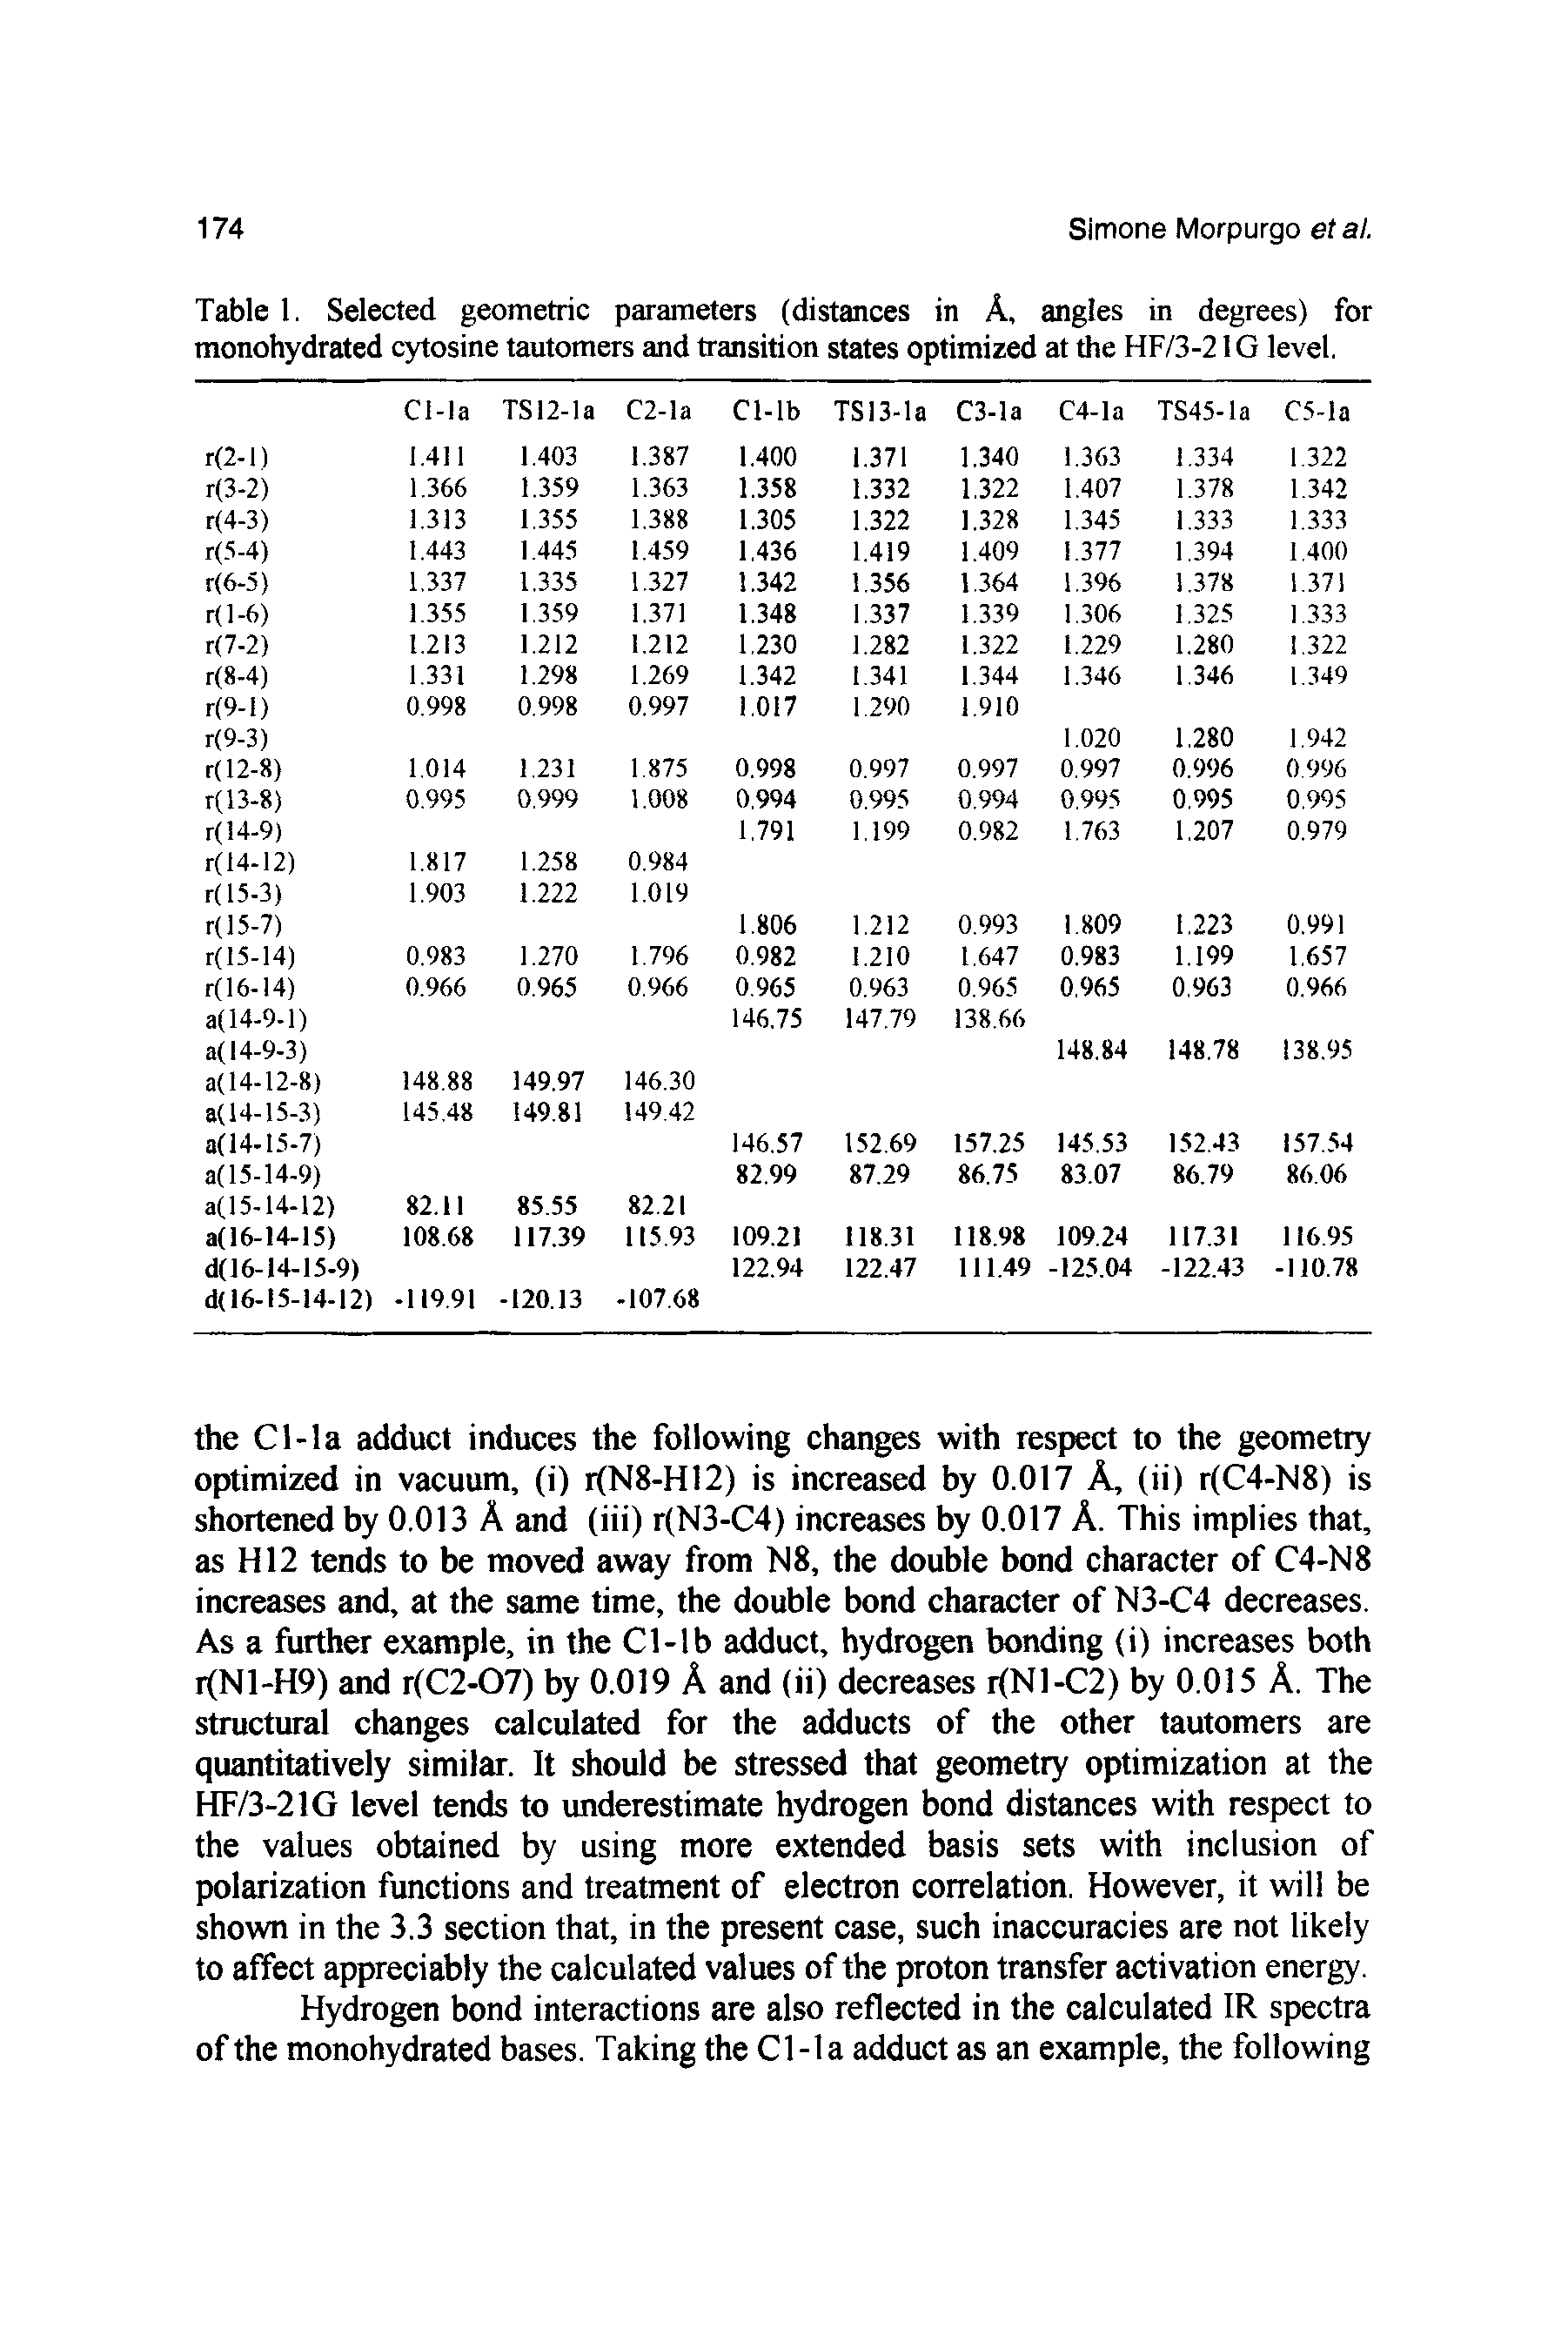 Table 1. Selected geometric parameters (distances in A, angles in degrees) for monohydrated cytosine tautomers and transition states optimized at the HF/3-2IG level.